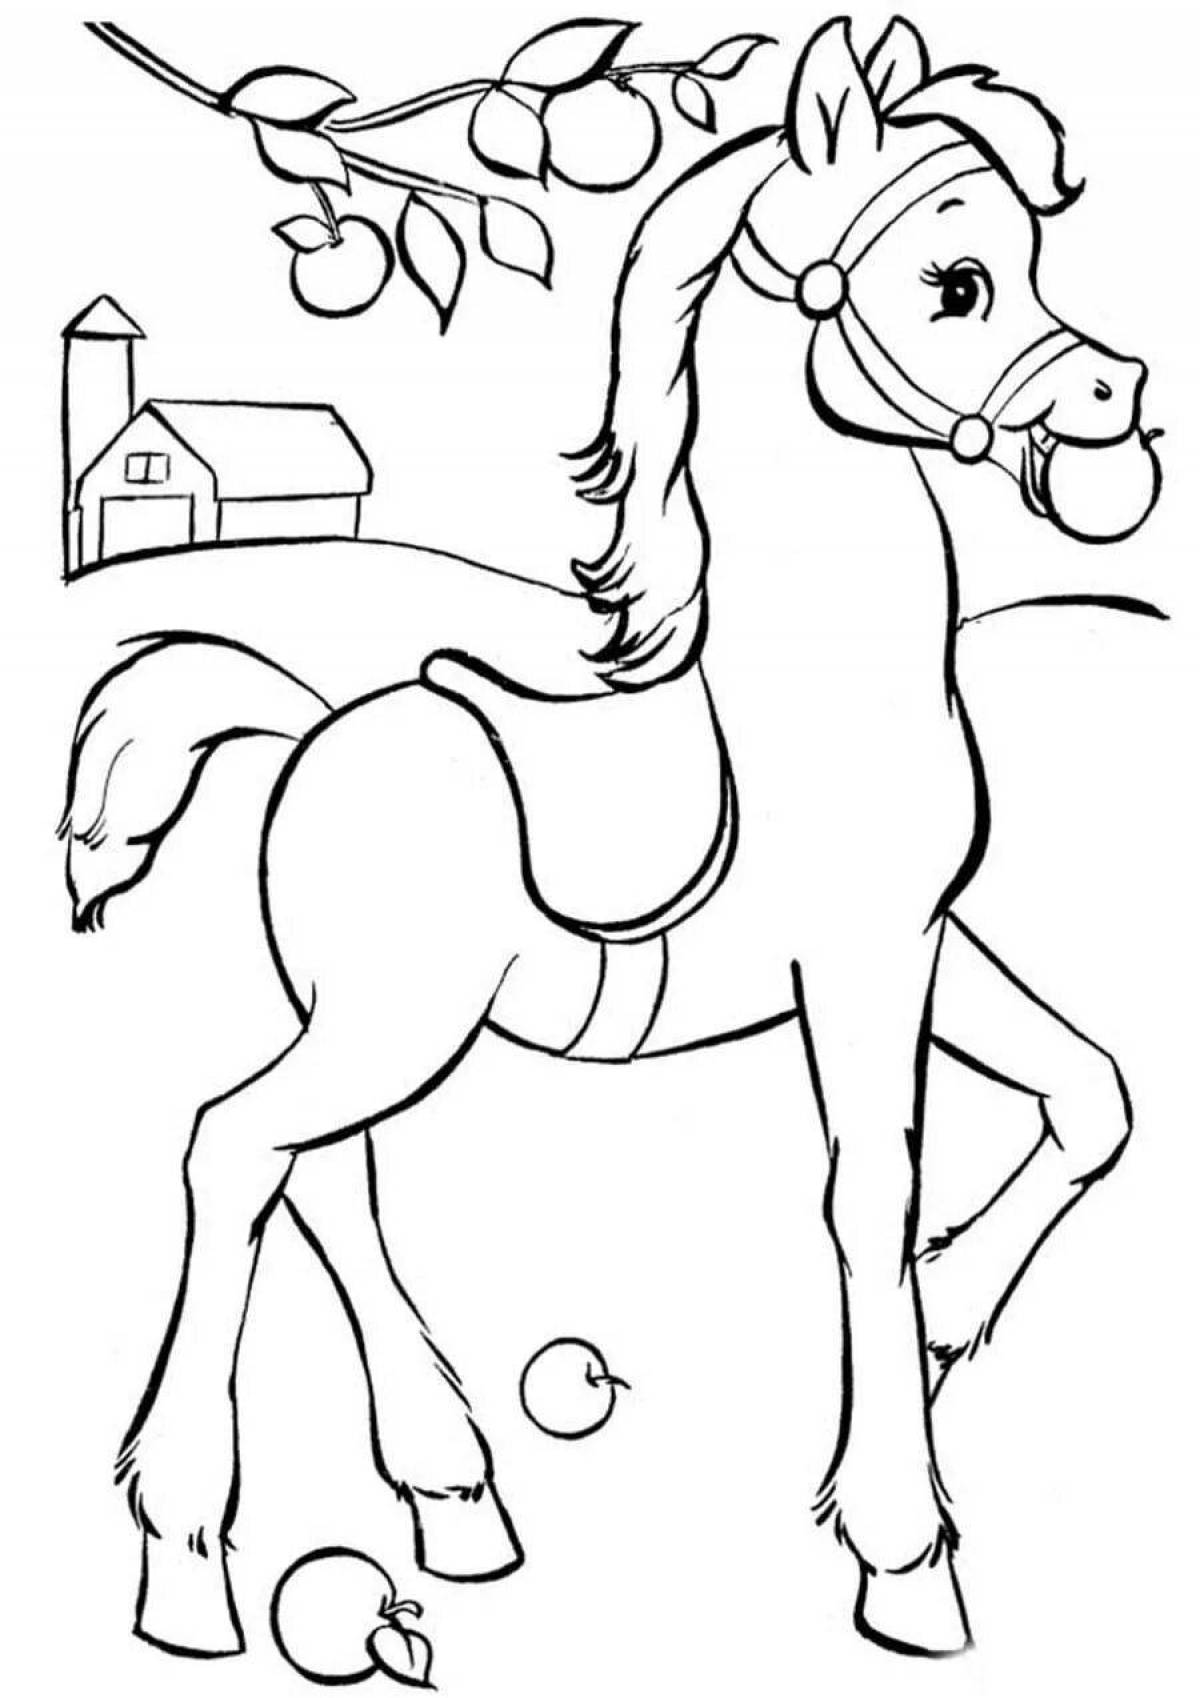 Vibrant children's printable coloring pages